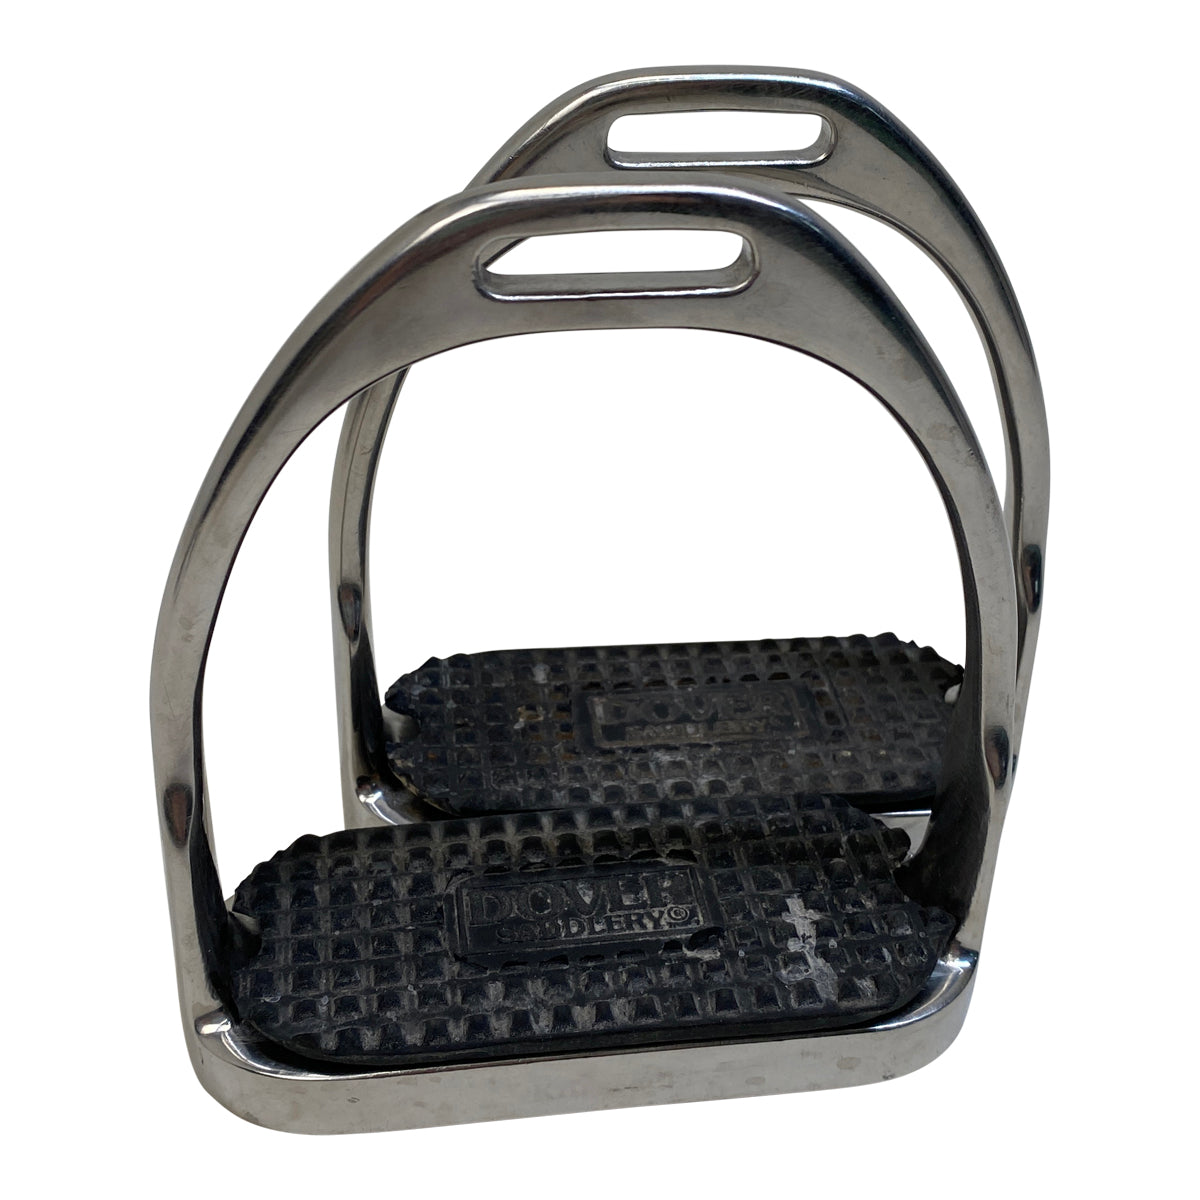 Dover Saddlery Stirrup Irons in Stainless Steel / Black